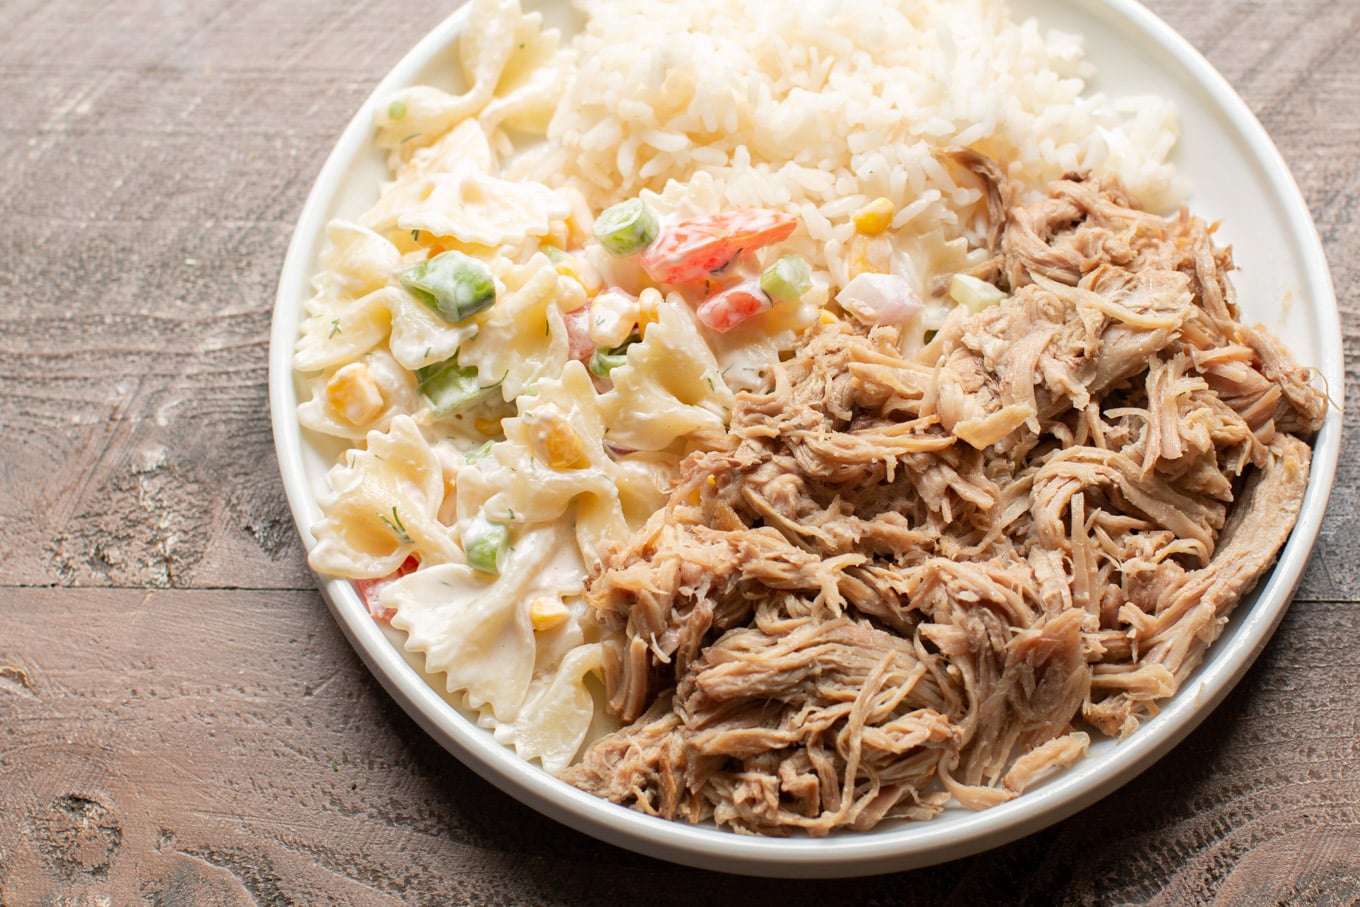 white plate with pasta salad, shredded pork and white rice.